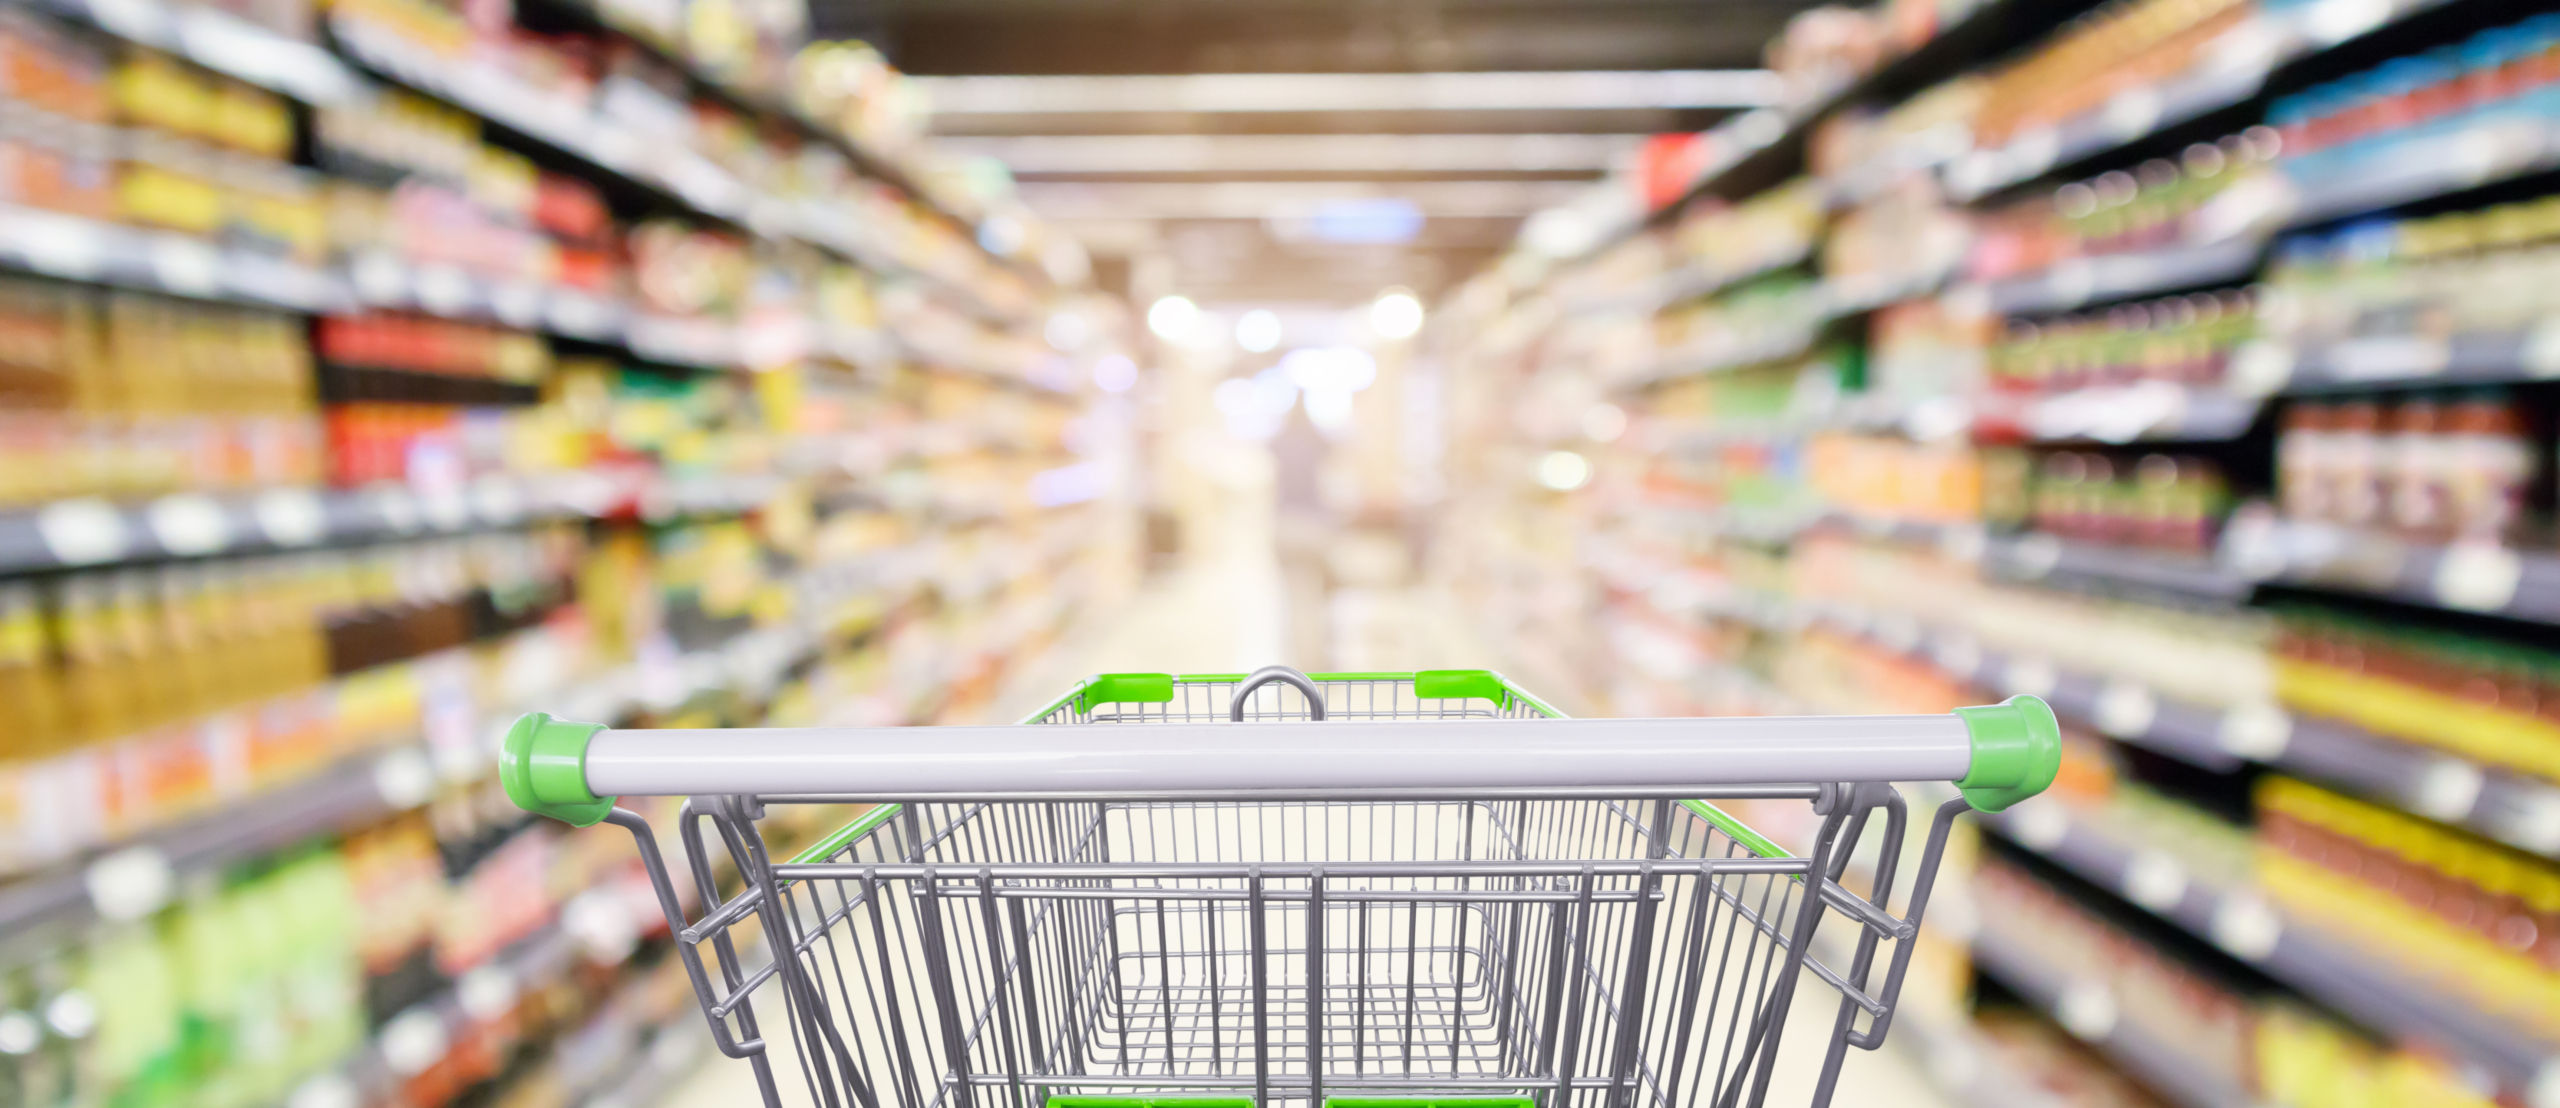 Automating quality management processes for Grocery Retailers